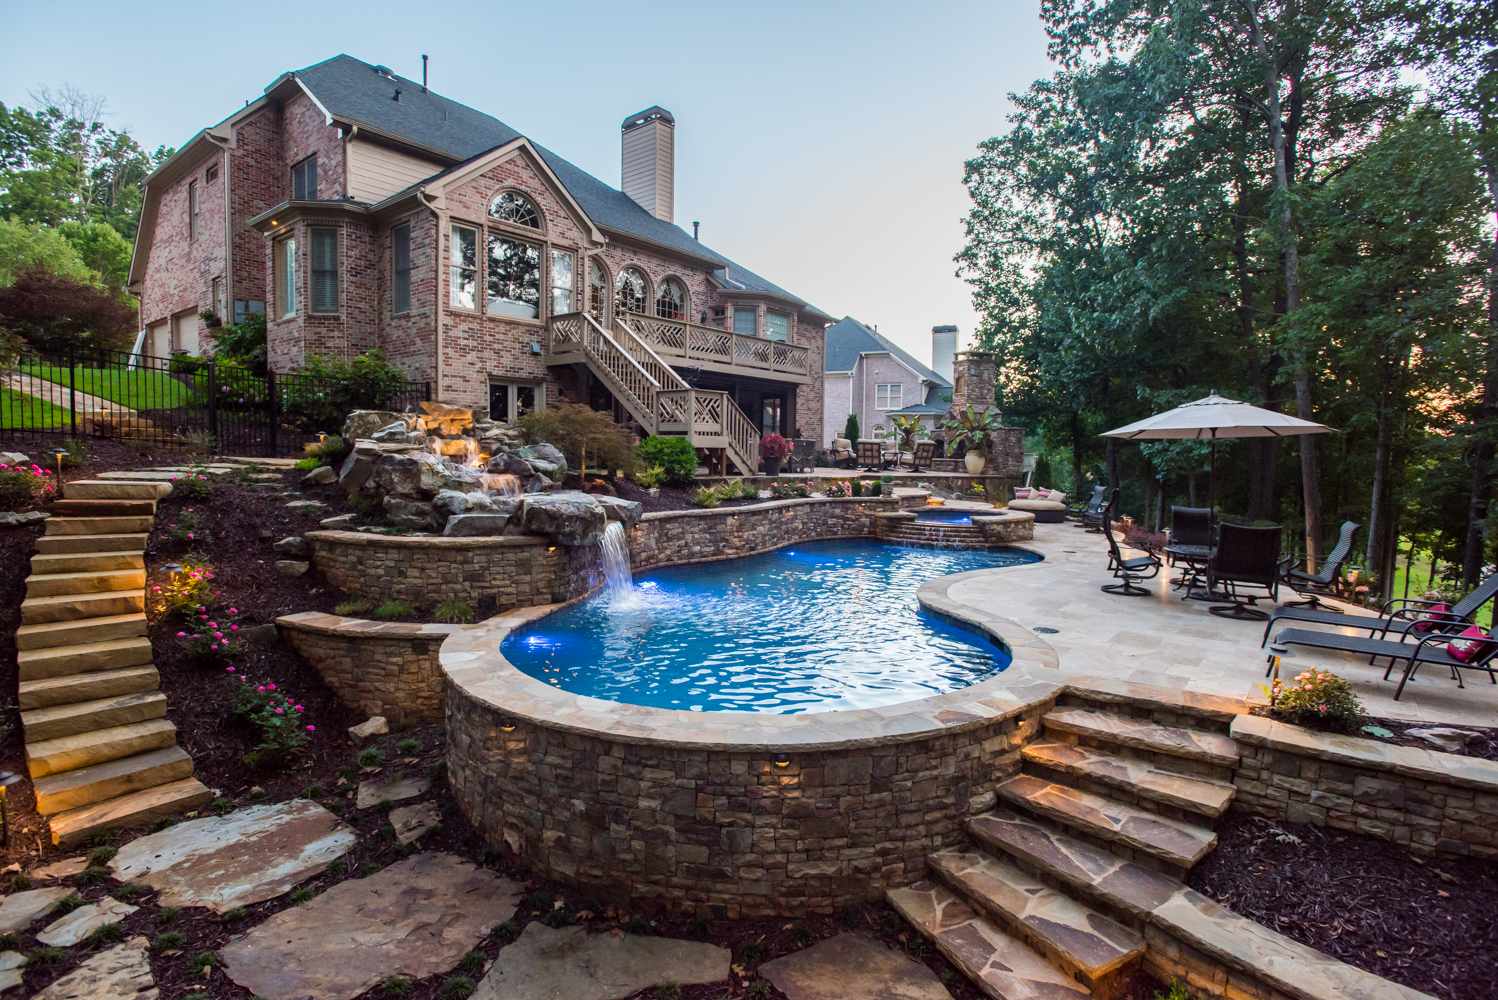 A custom freeform pool surrounded by lush greenery, with a boulder waterfall and flagstone steppers guiding to a seating area.